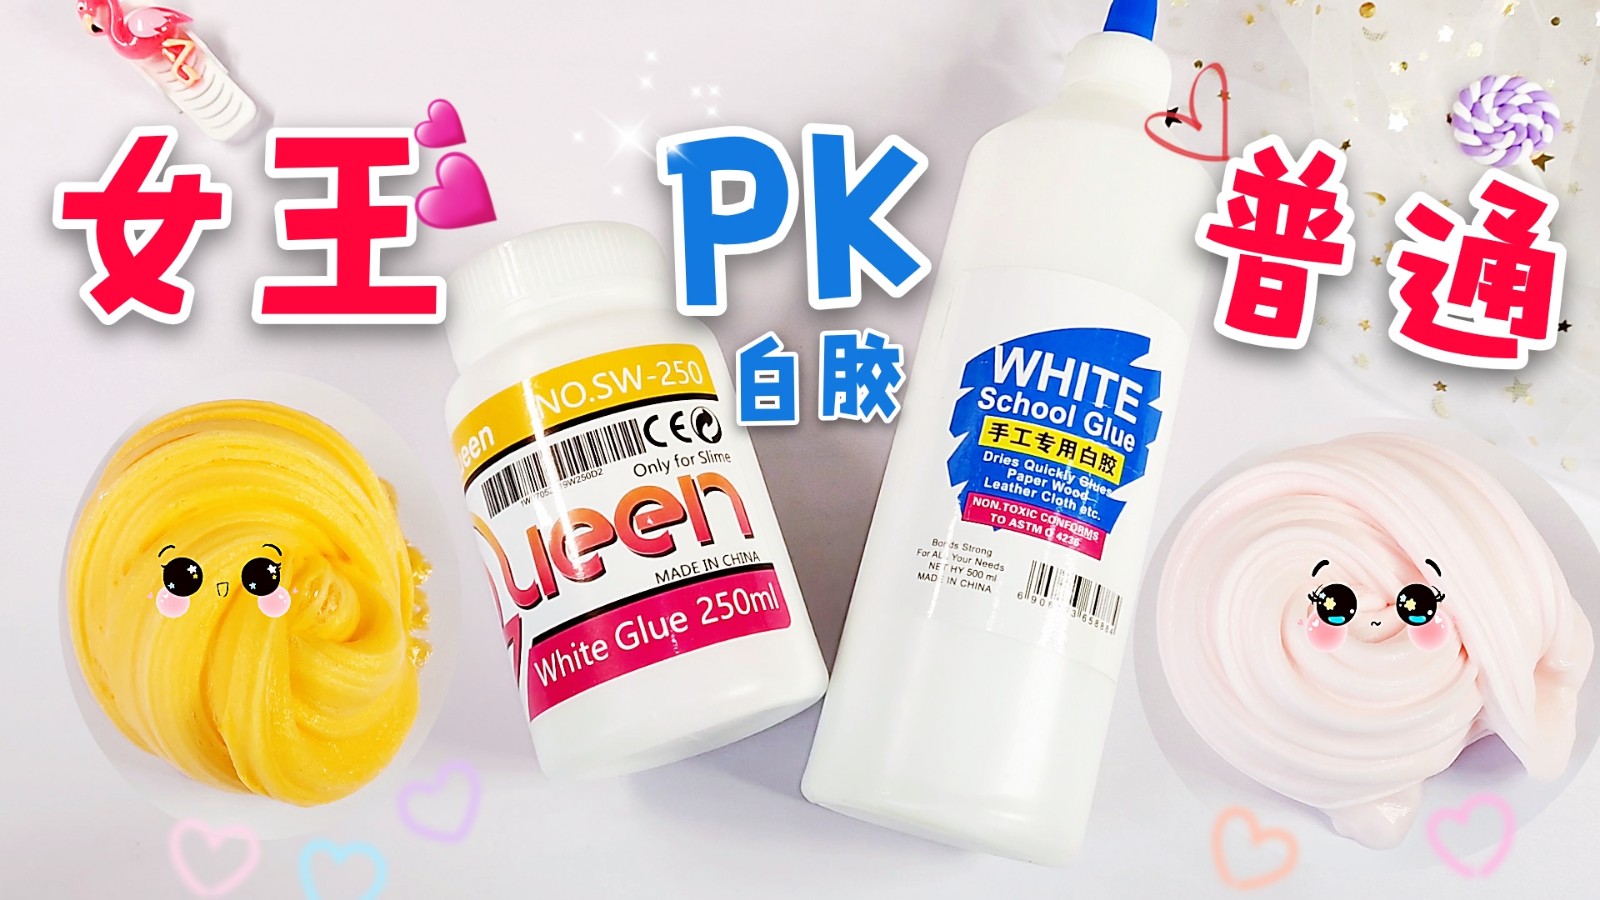 Queen's white glue PK ordinary white glue, experiments prove that the effect of mud is different, borax-free.